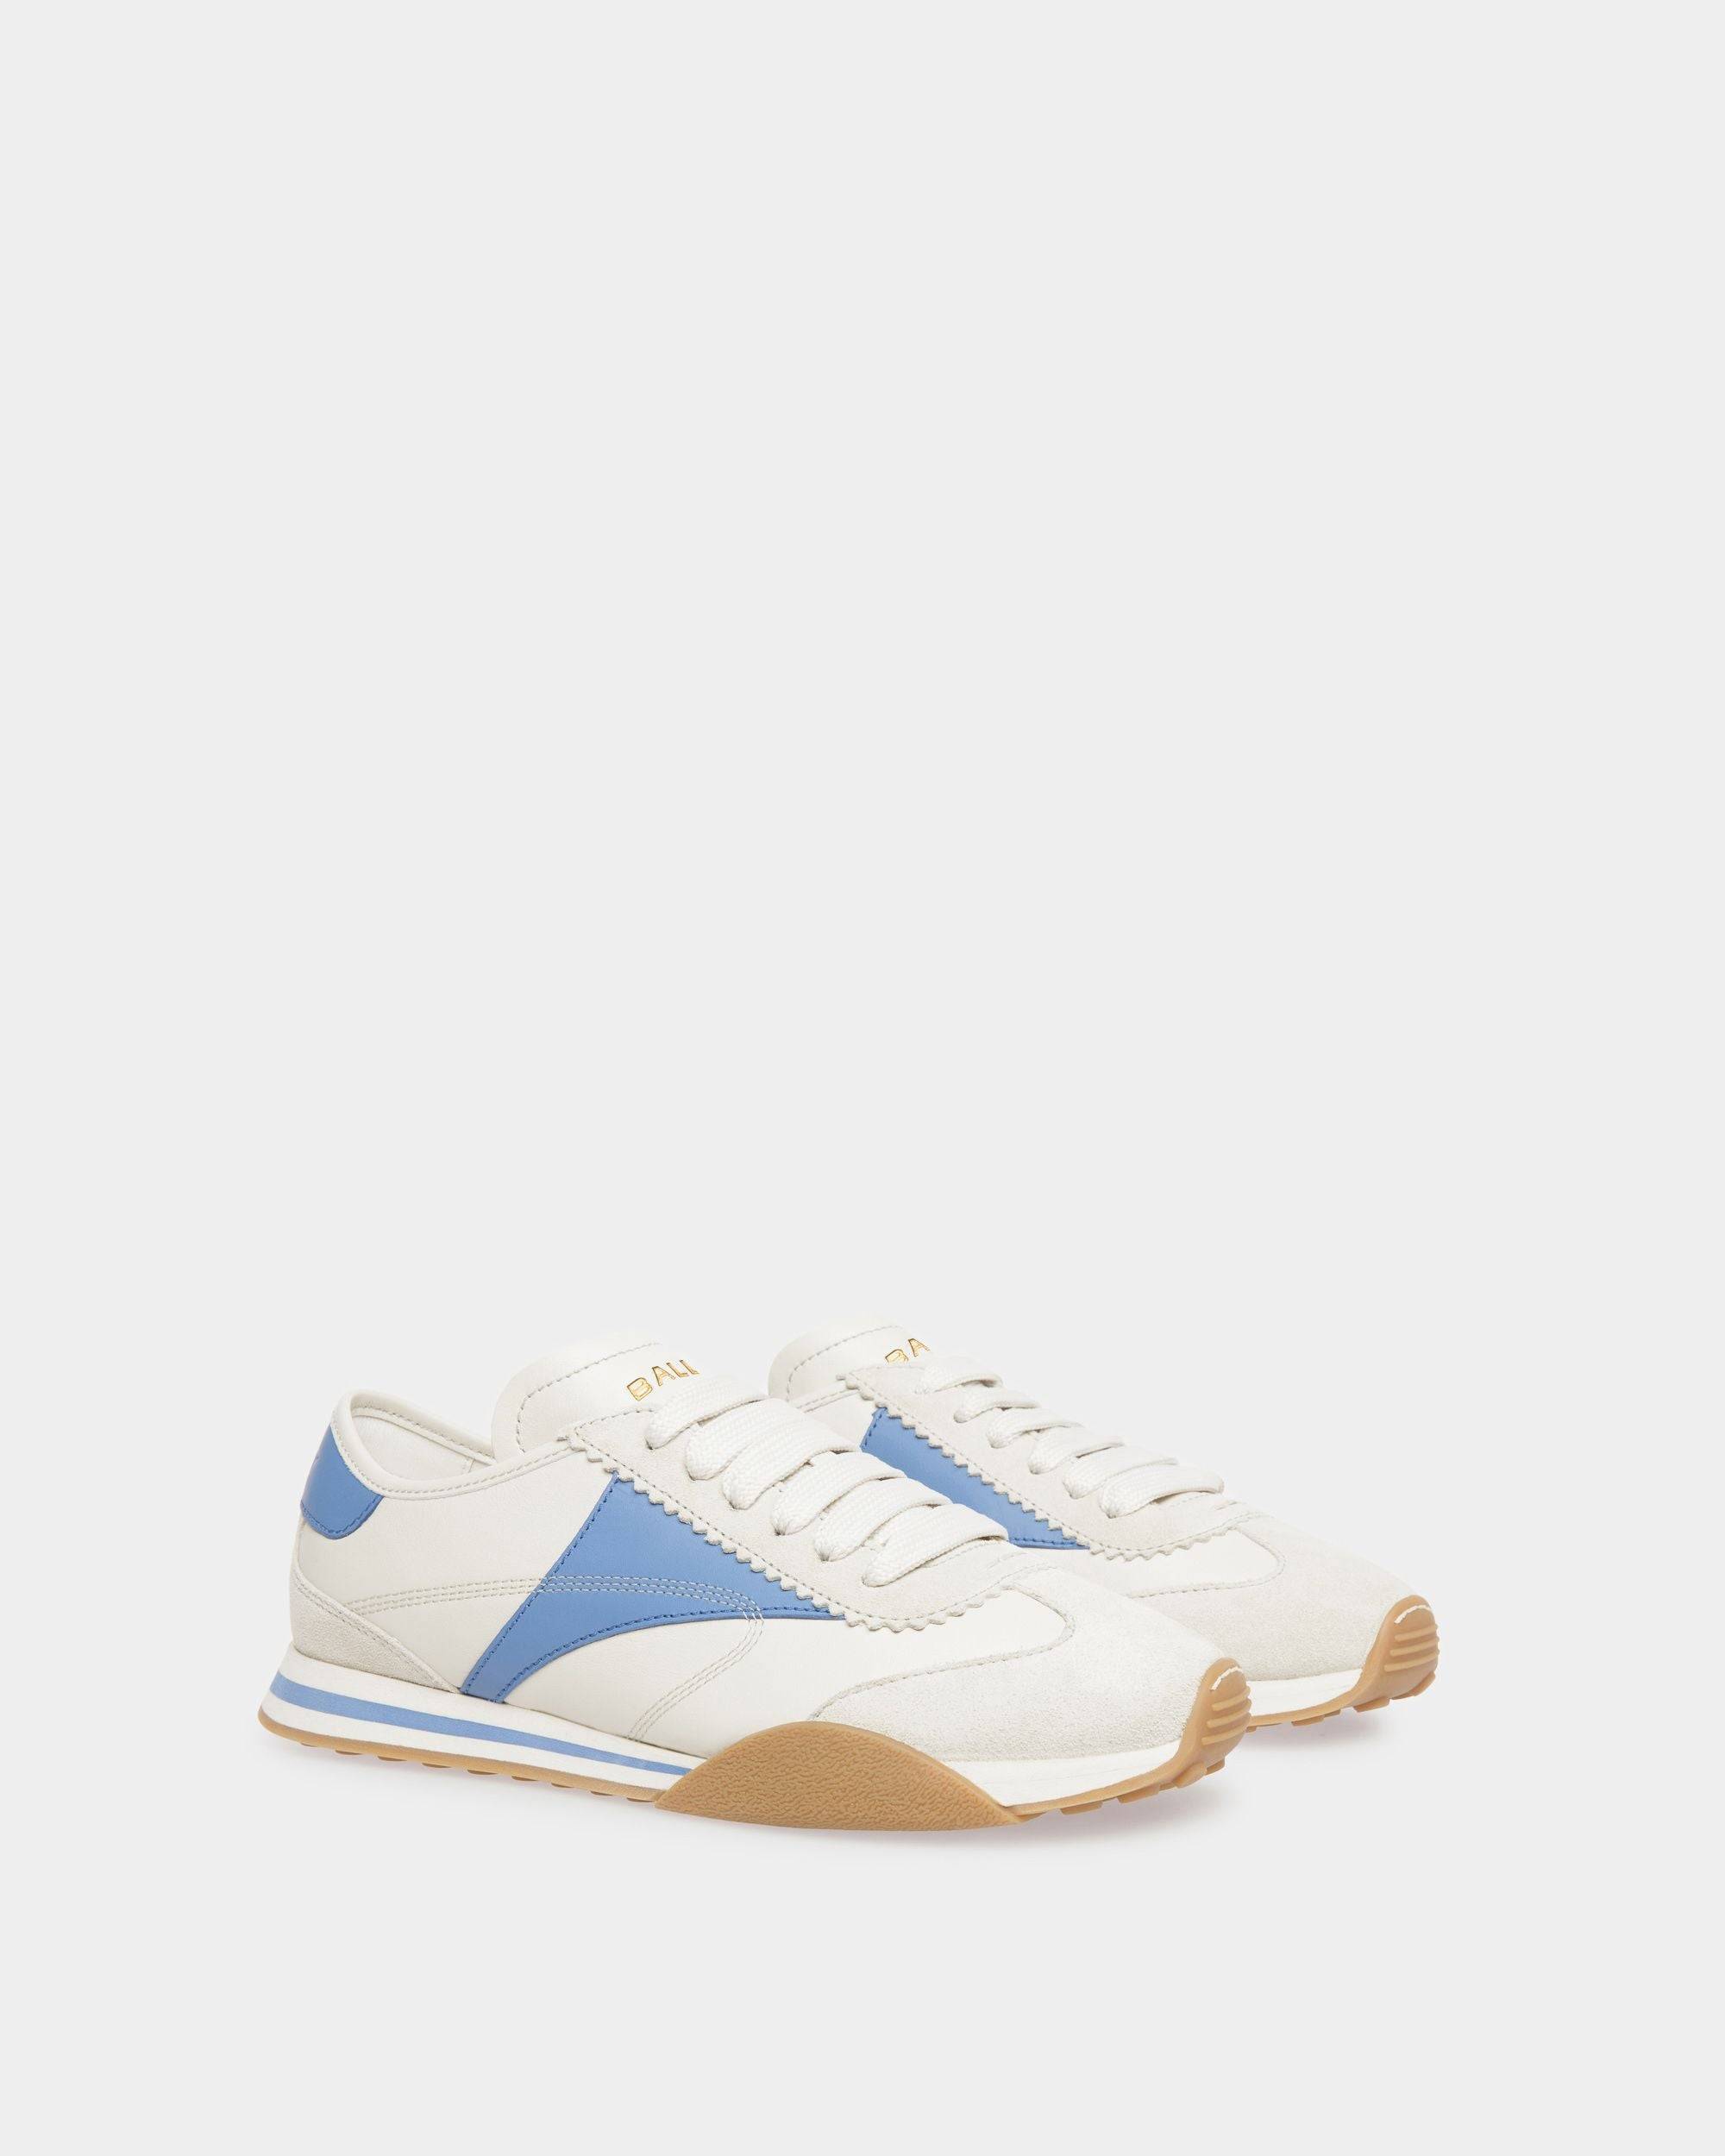 Sonney | Women's Sneakers | Dusty White And Black Leather | Bally | Still Life 3/4 Front